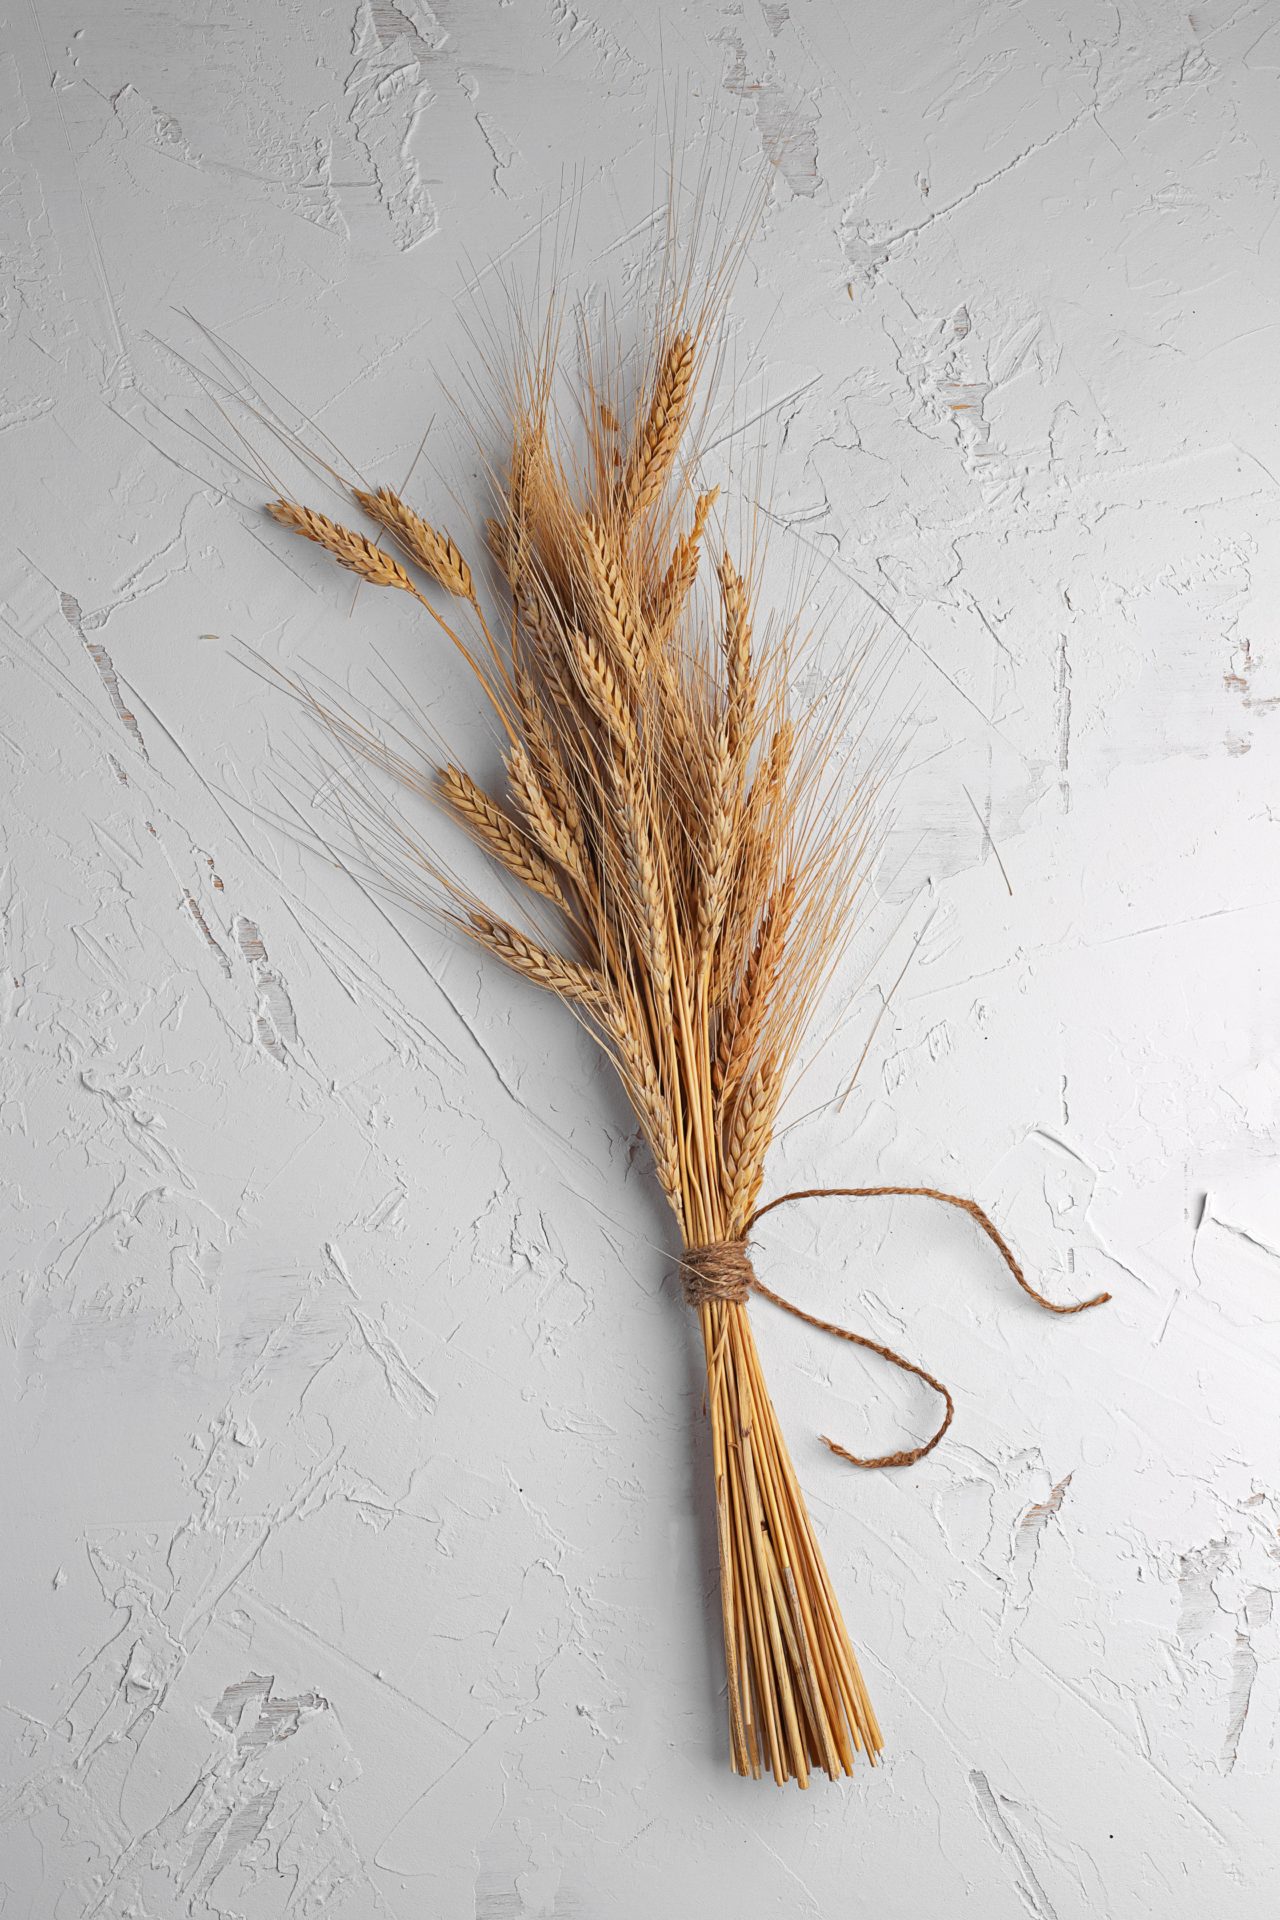 Infarm’s indoor wheat suggests we re-examine the realities of vertically-farmed commodities